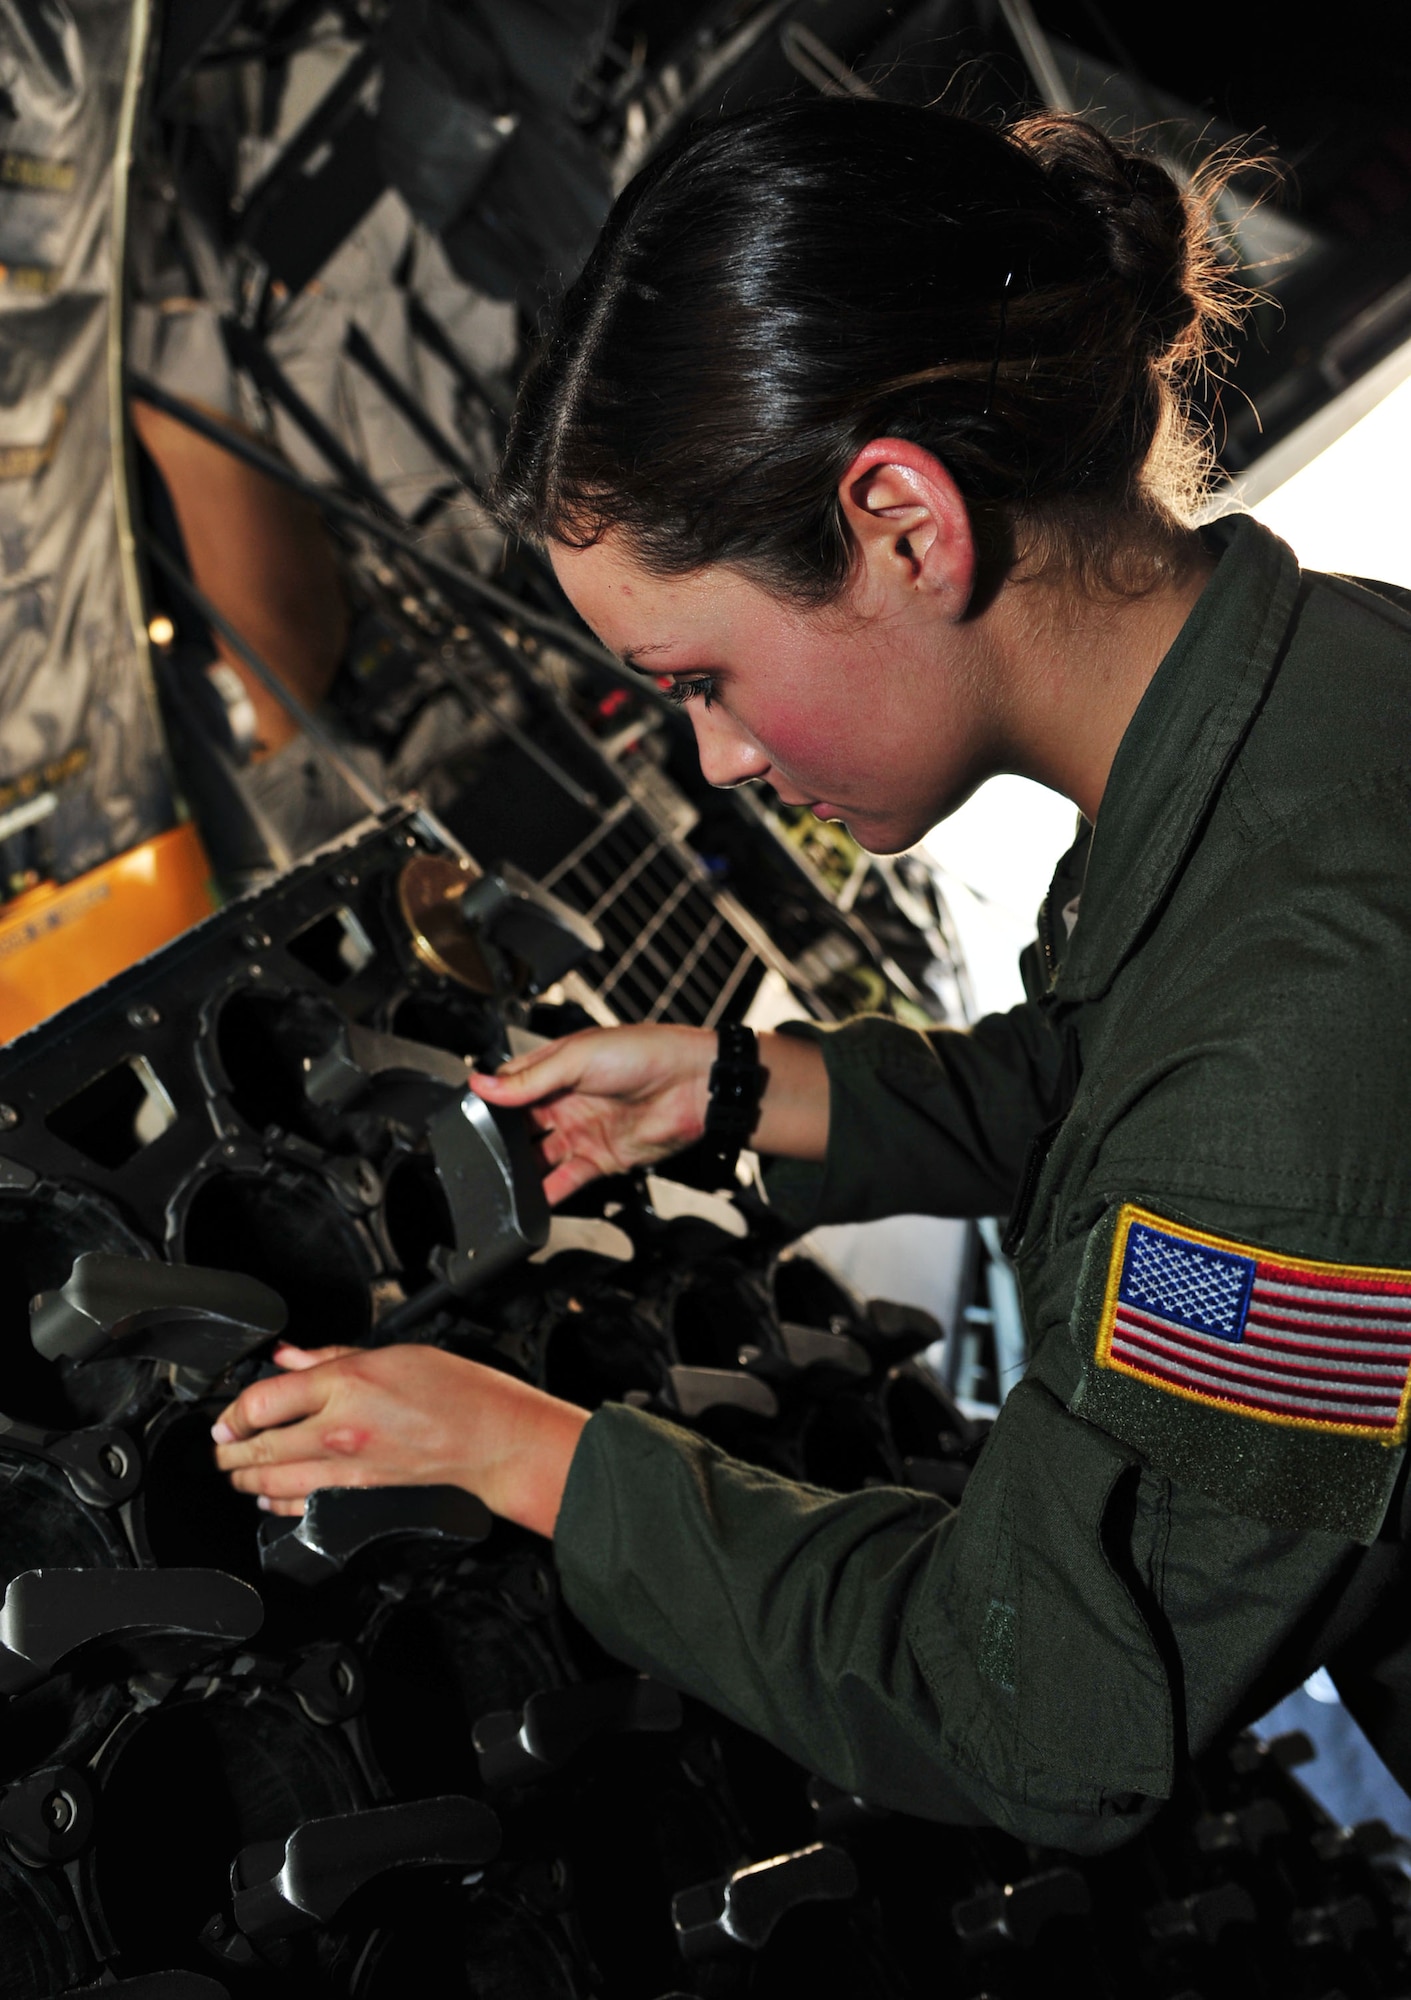 U.S. Air Force Airman First Class Mary Howe, 4th Special Operations Squadron aerial gunner, inspects an AC-130 Spooky Gunship ammunition, storage and handling system for foreign object debris, Hurlburt Field, Fla., June 17, 2013. Howe is the granddaughter of retired Army Col. Charles Beckwith who is credited with the creation of the U.S. Army's Delta Force, which in turn paved the way for the special operations we know today. (U.S. Air Force photo by Senior Airman Desiree Whitney Moye)